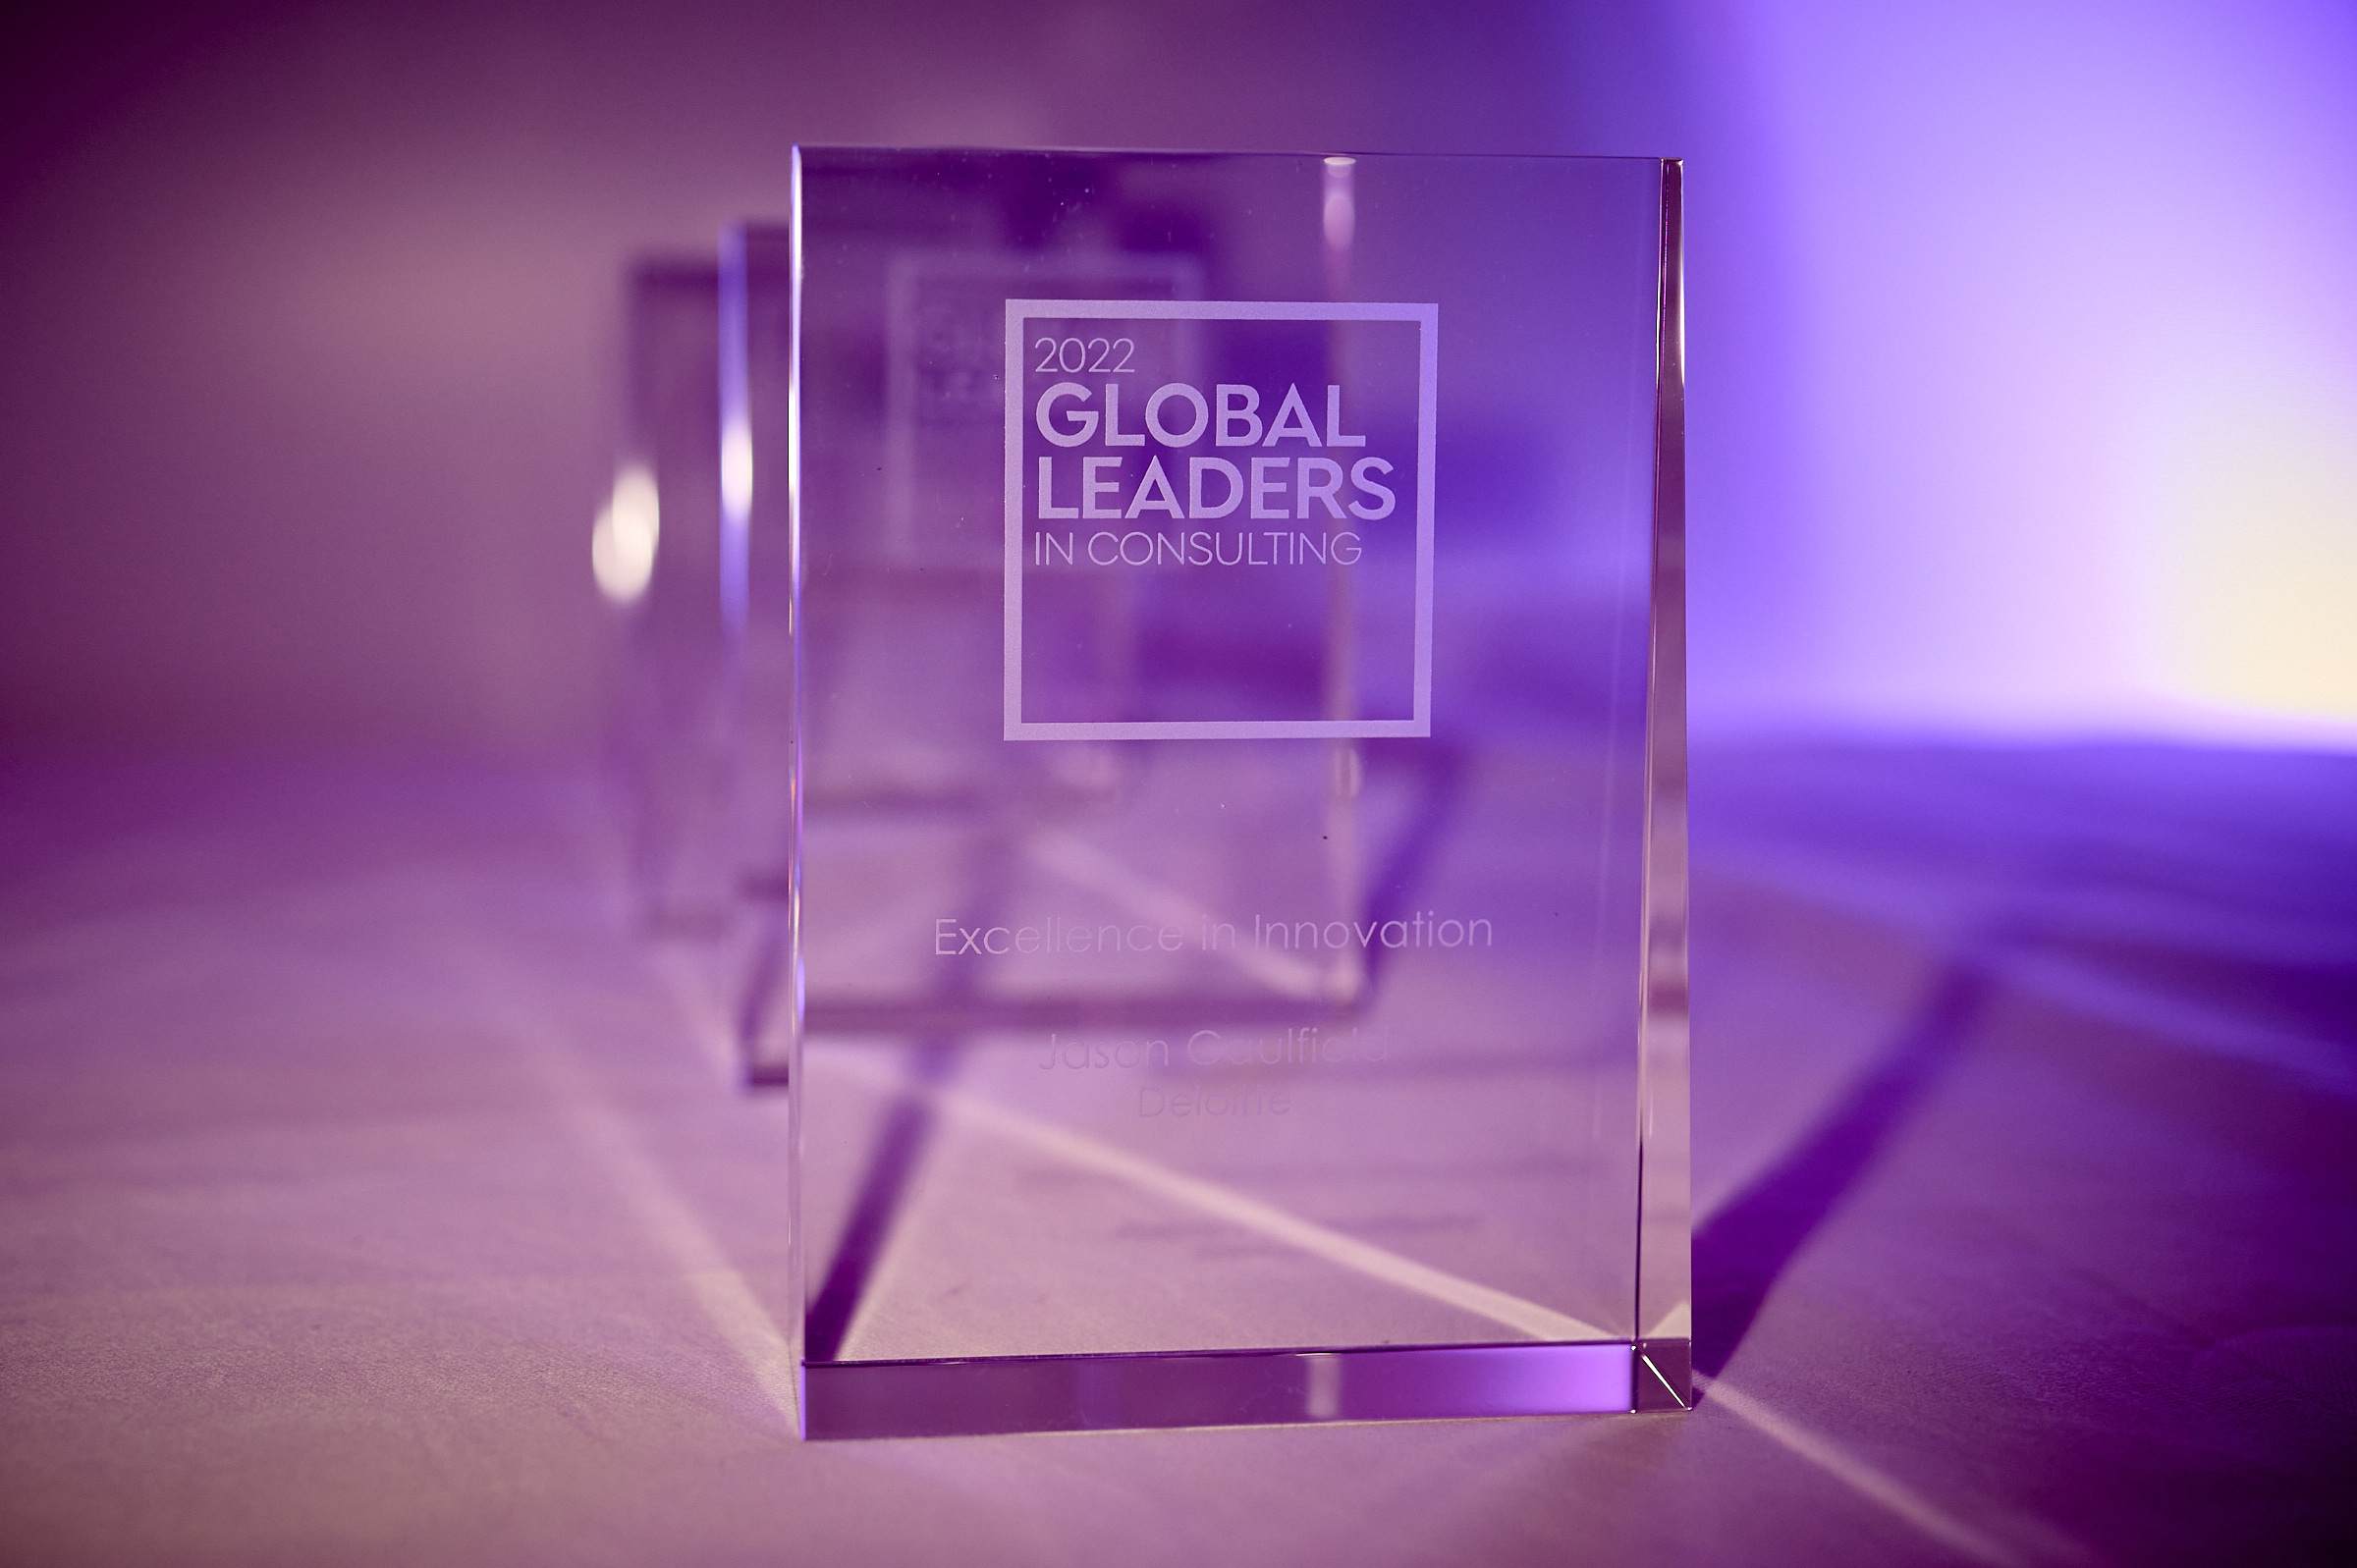 Award Event Photos: 2022 Global Leaders in Consulting